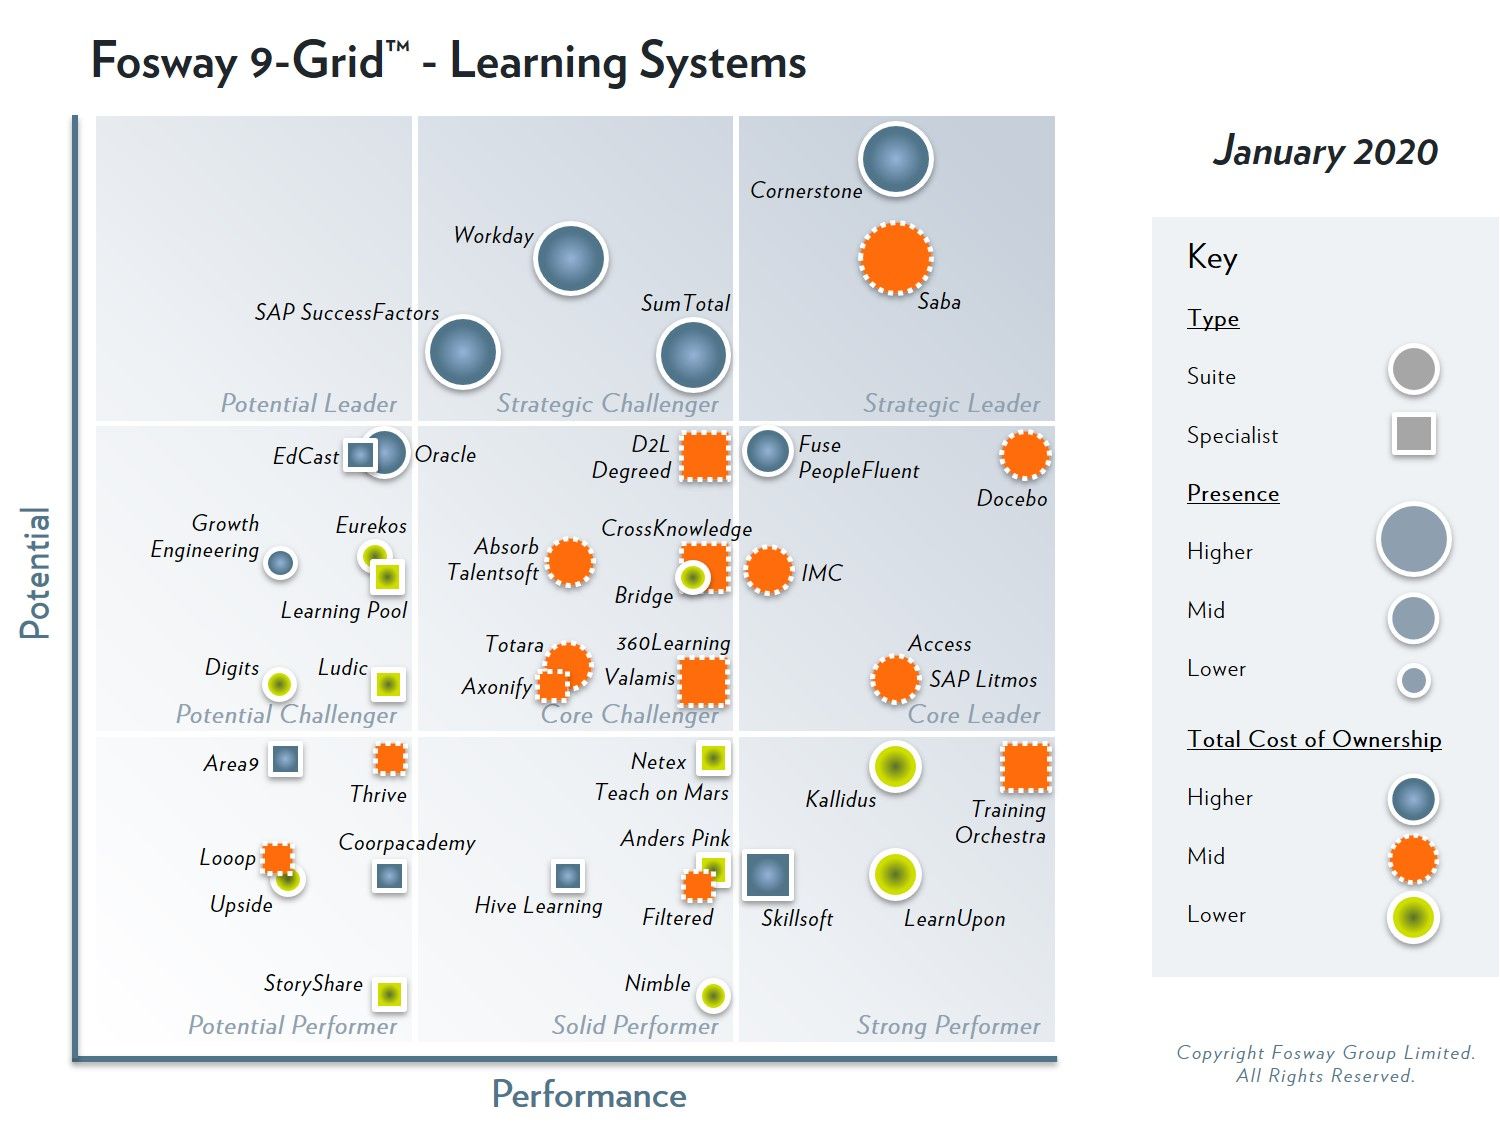 Fosway 9-Grid for Learning Systems